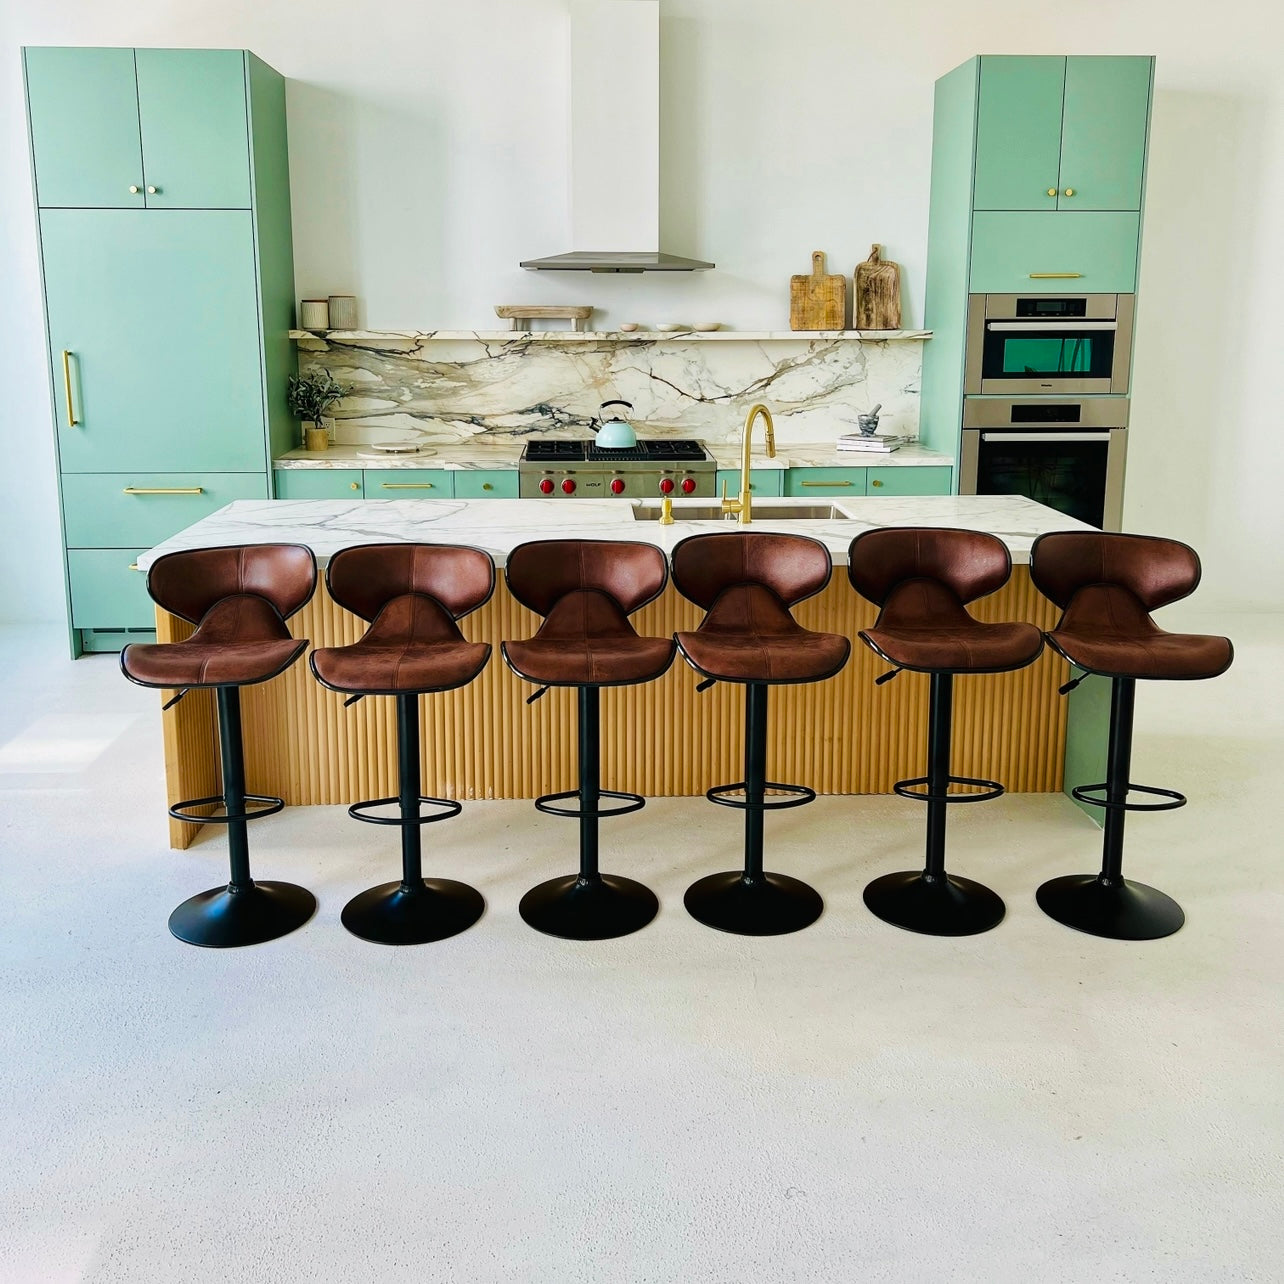 Brown Leather Bar Stools with Black Base